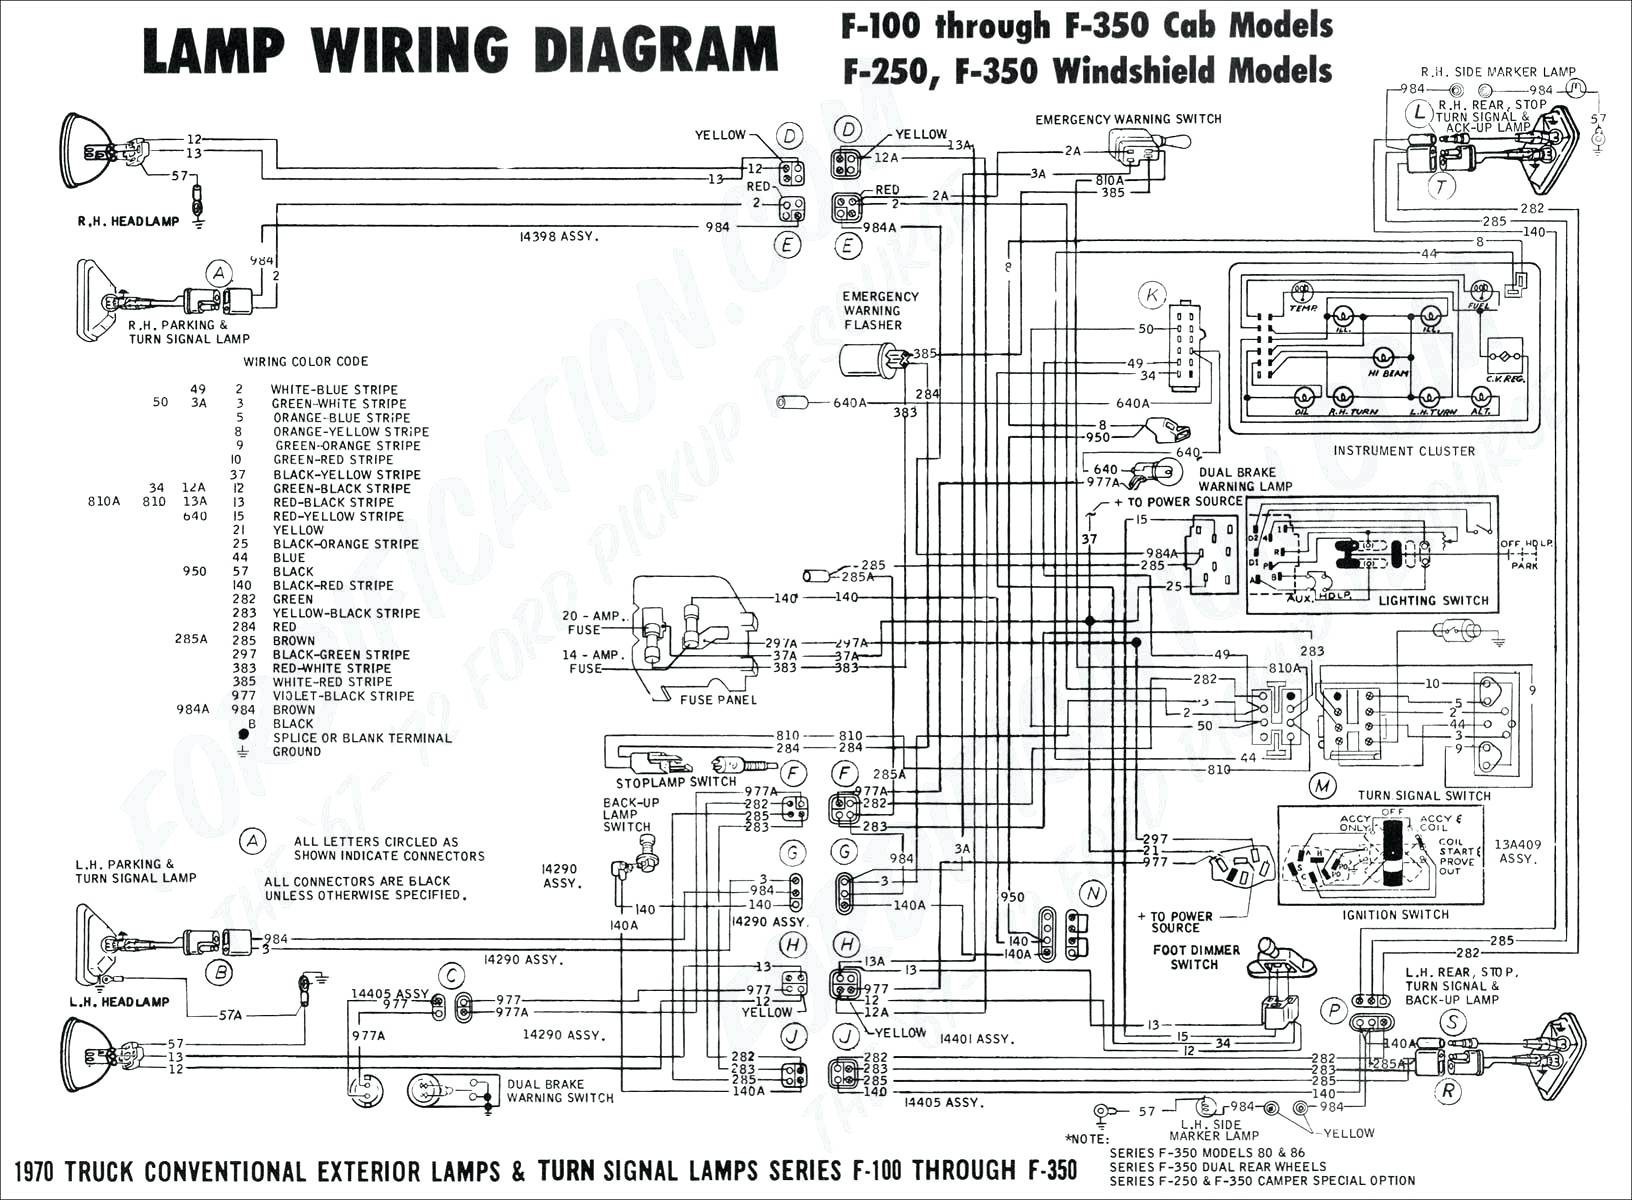 Wiring Diagram for 350 Chevy Engine Kiefer Wiring Diagram Wiring Diagram toolbox Of Wiring Diagram for 350 Chevy Engine